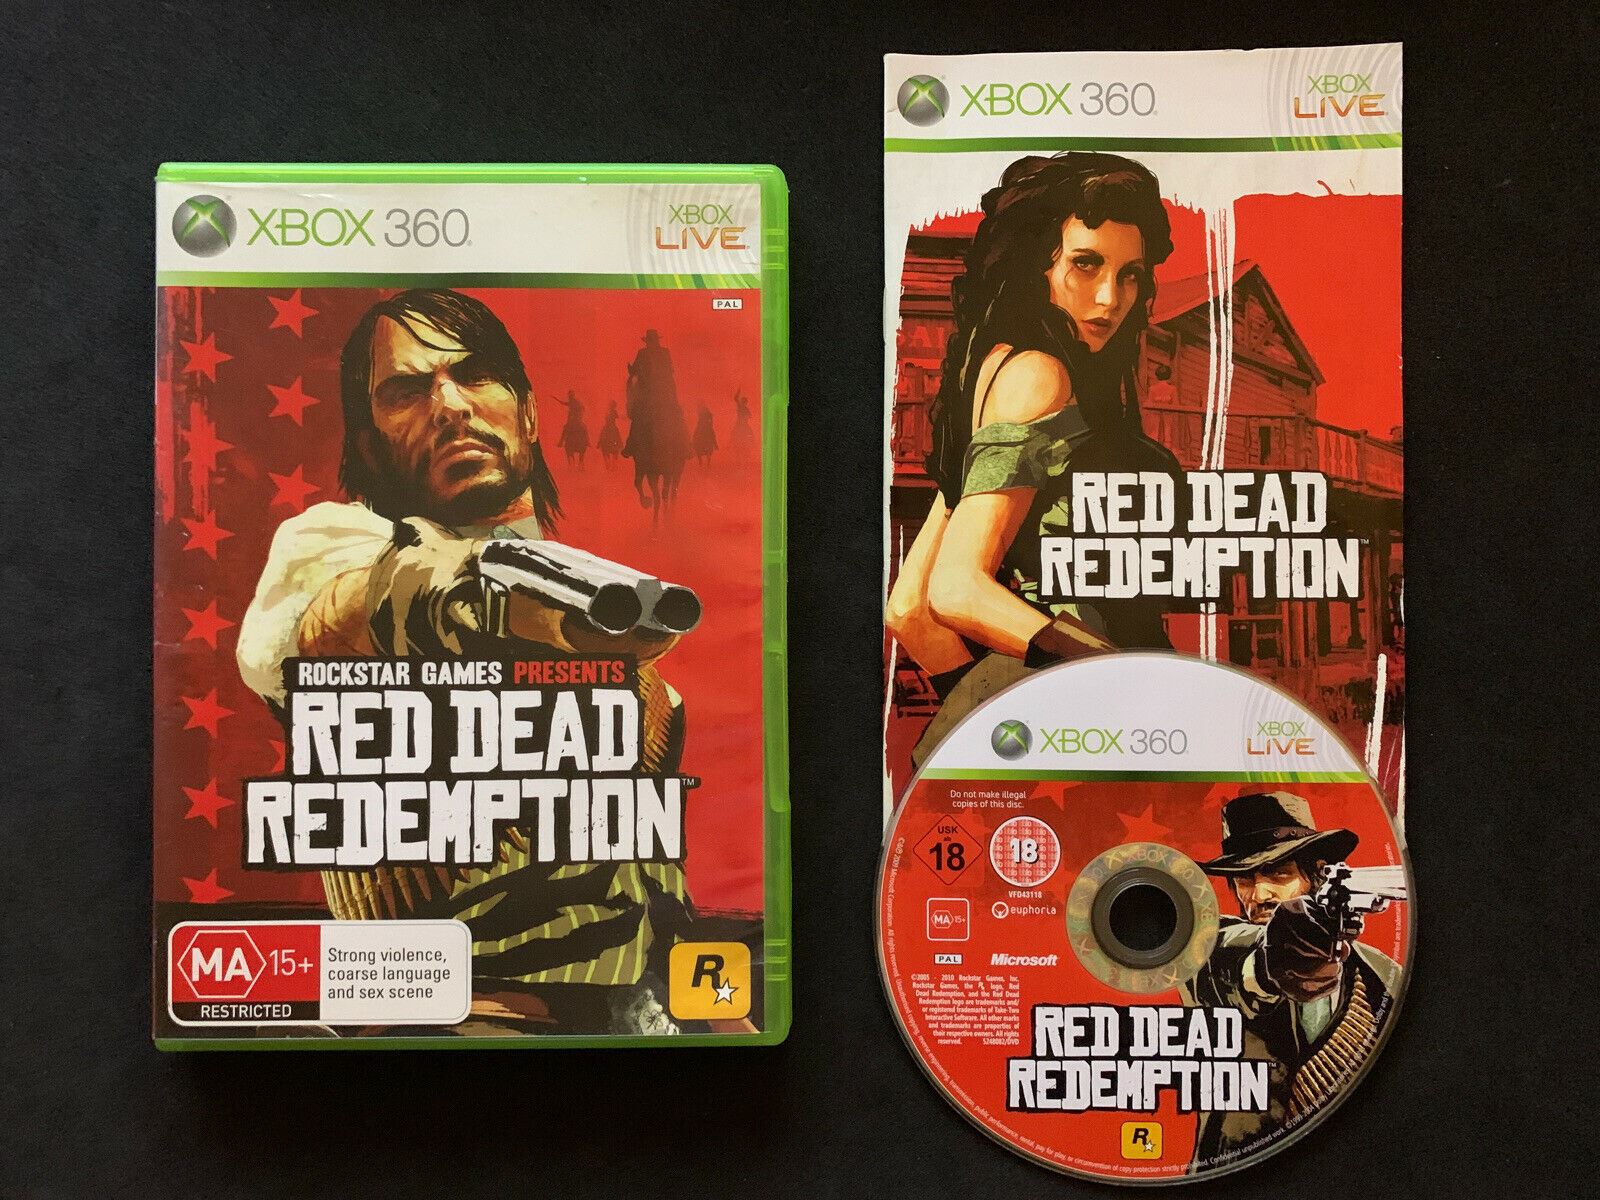  Red Dead Redemption Xbox 360 for PAL : Video Games